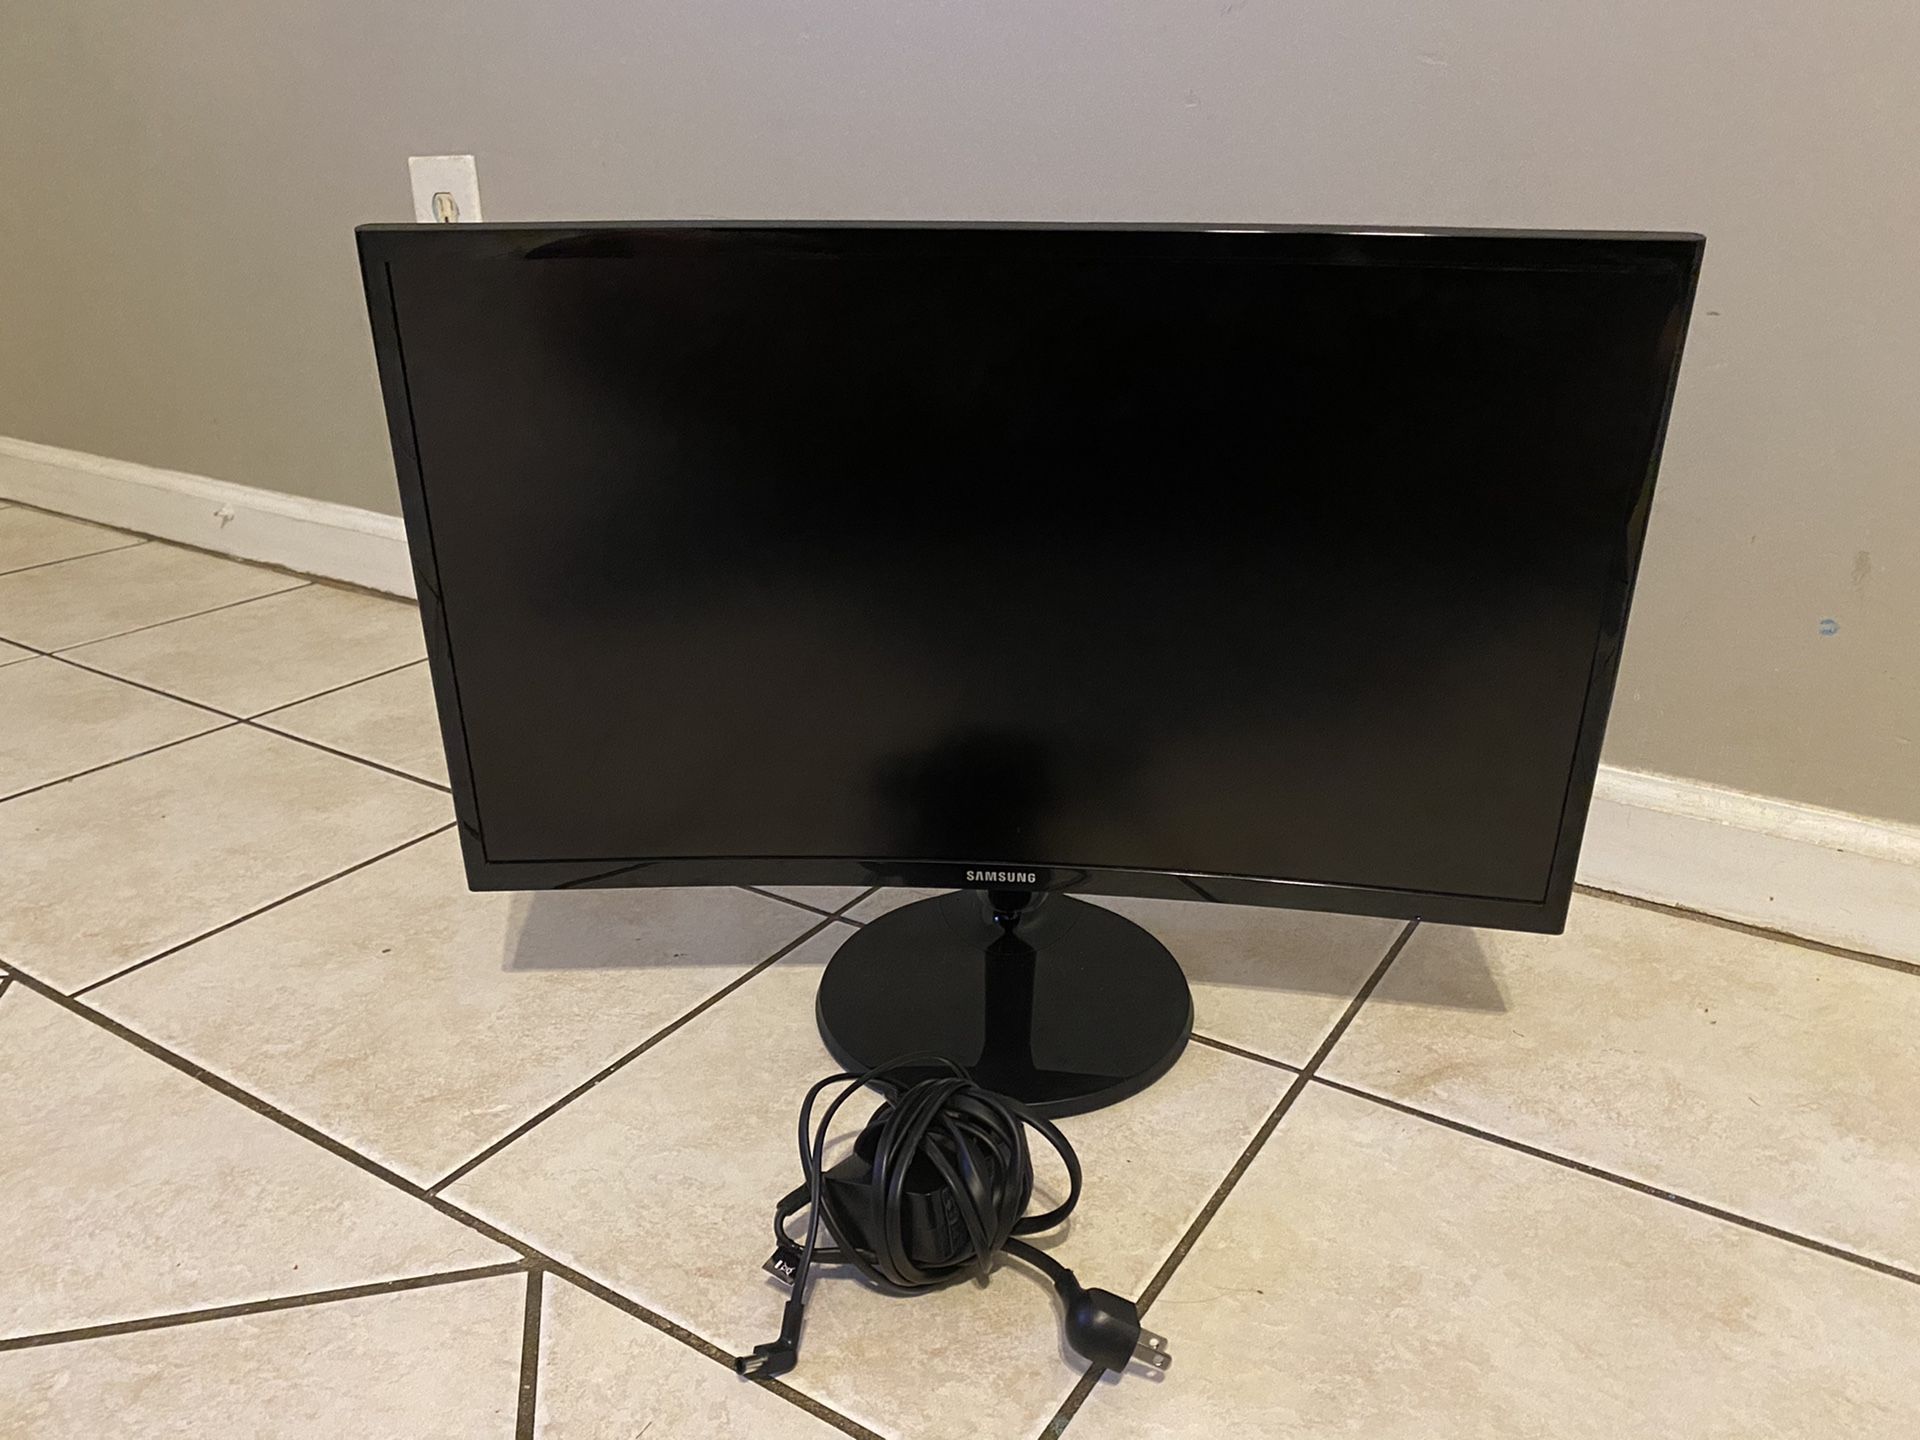 Samsung CF390 LED Curved Monitor 24”